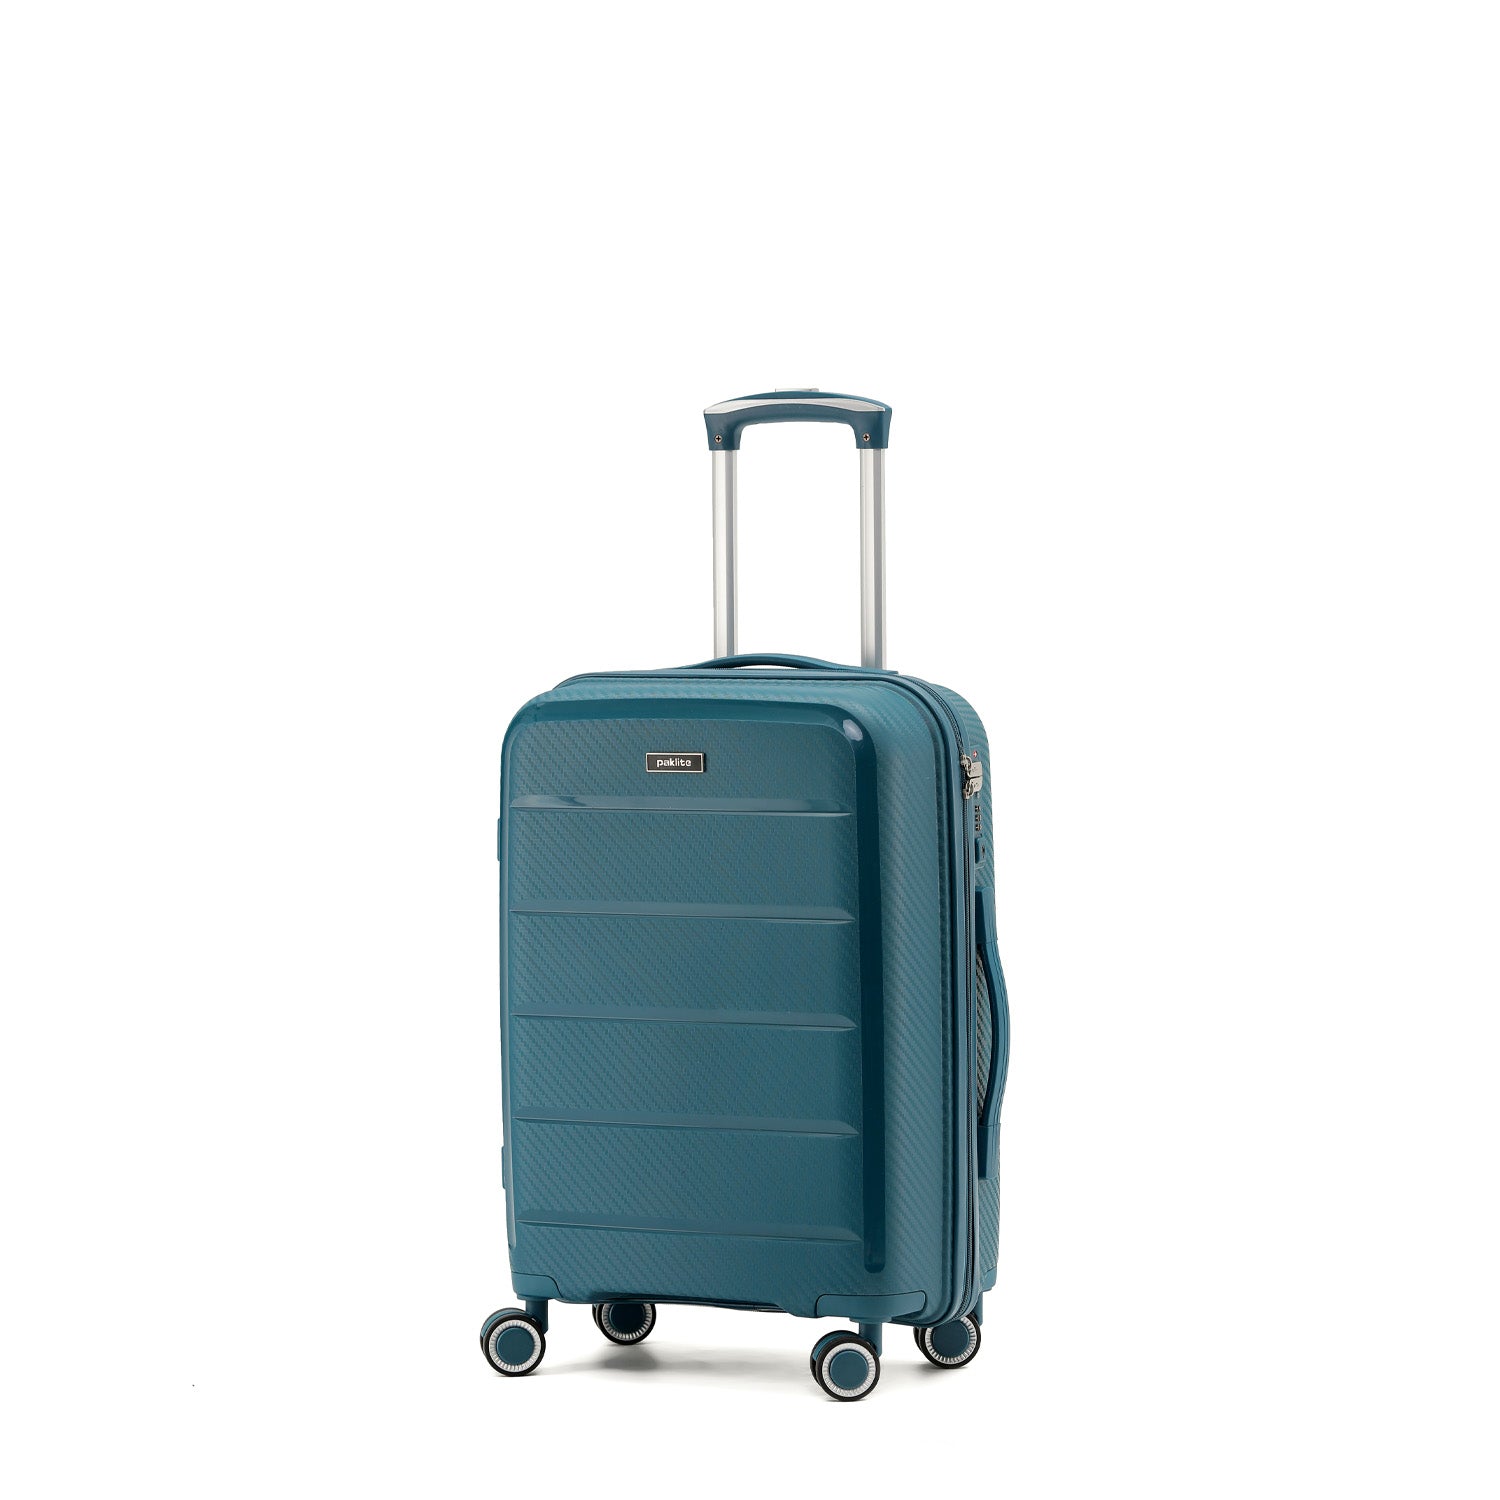 Paklite - PA7350 small spinner suitcase - Blue-5